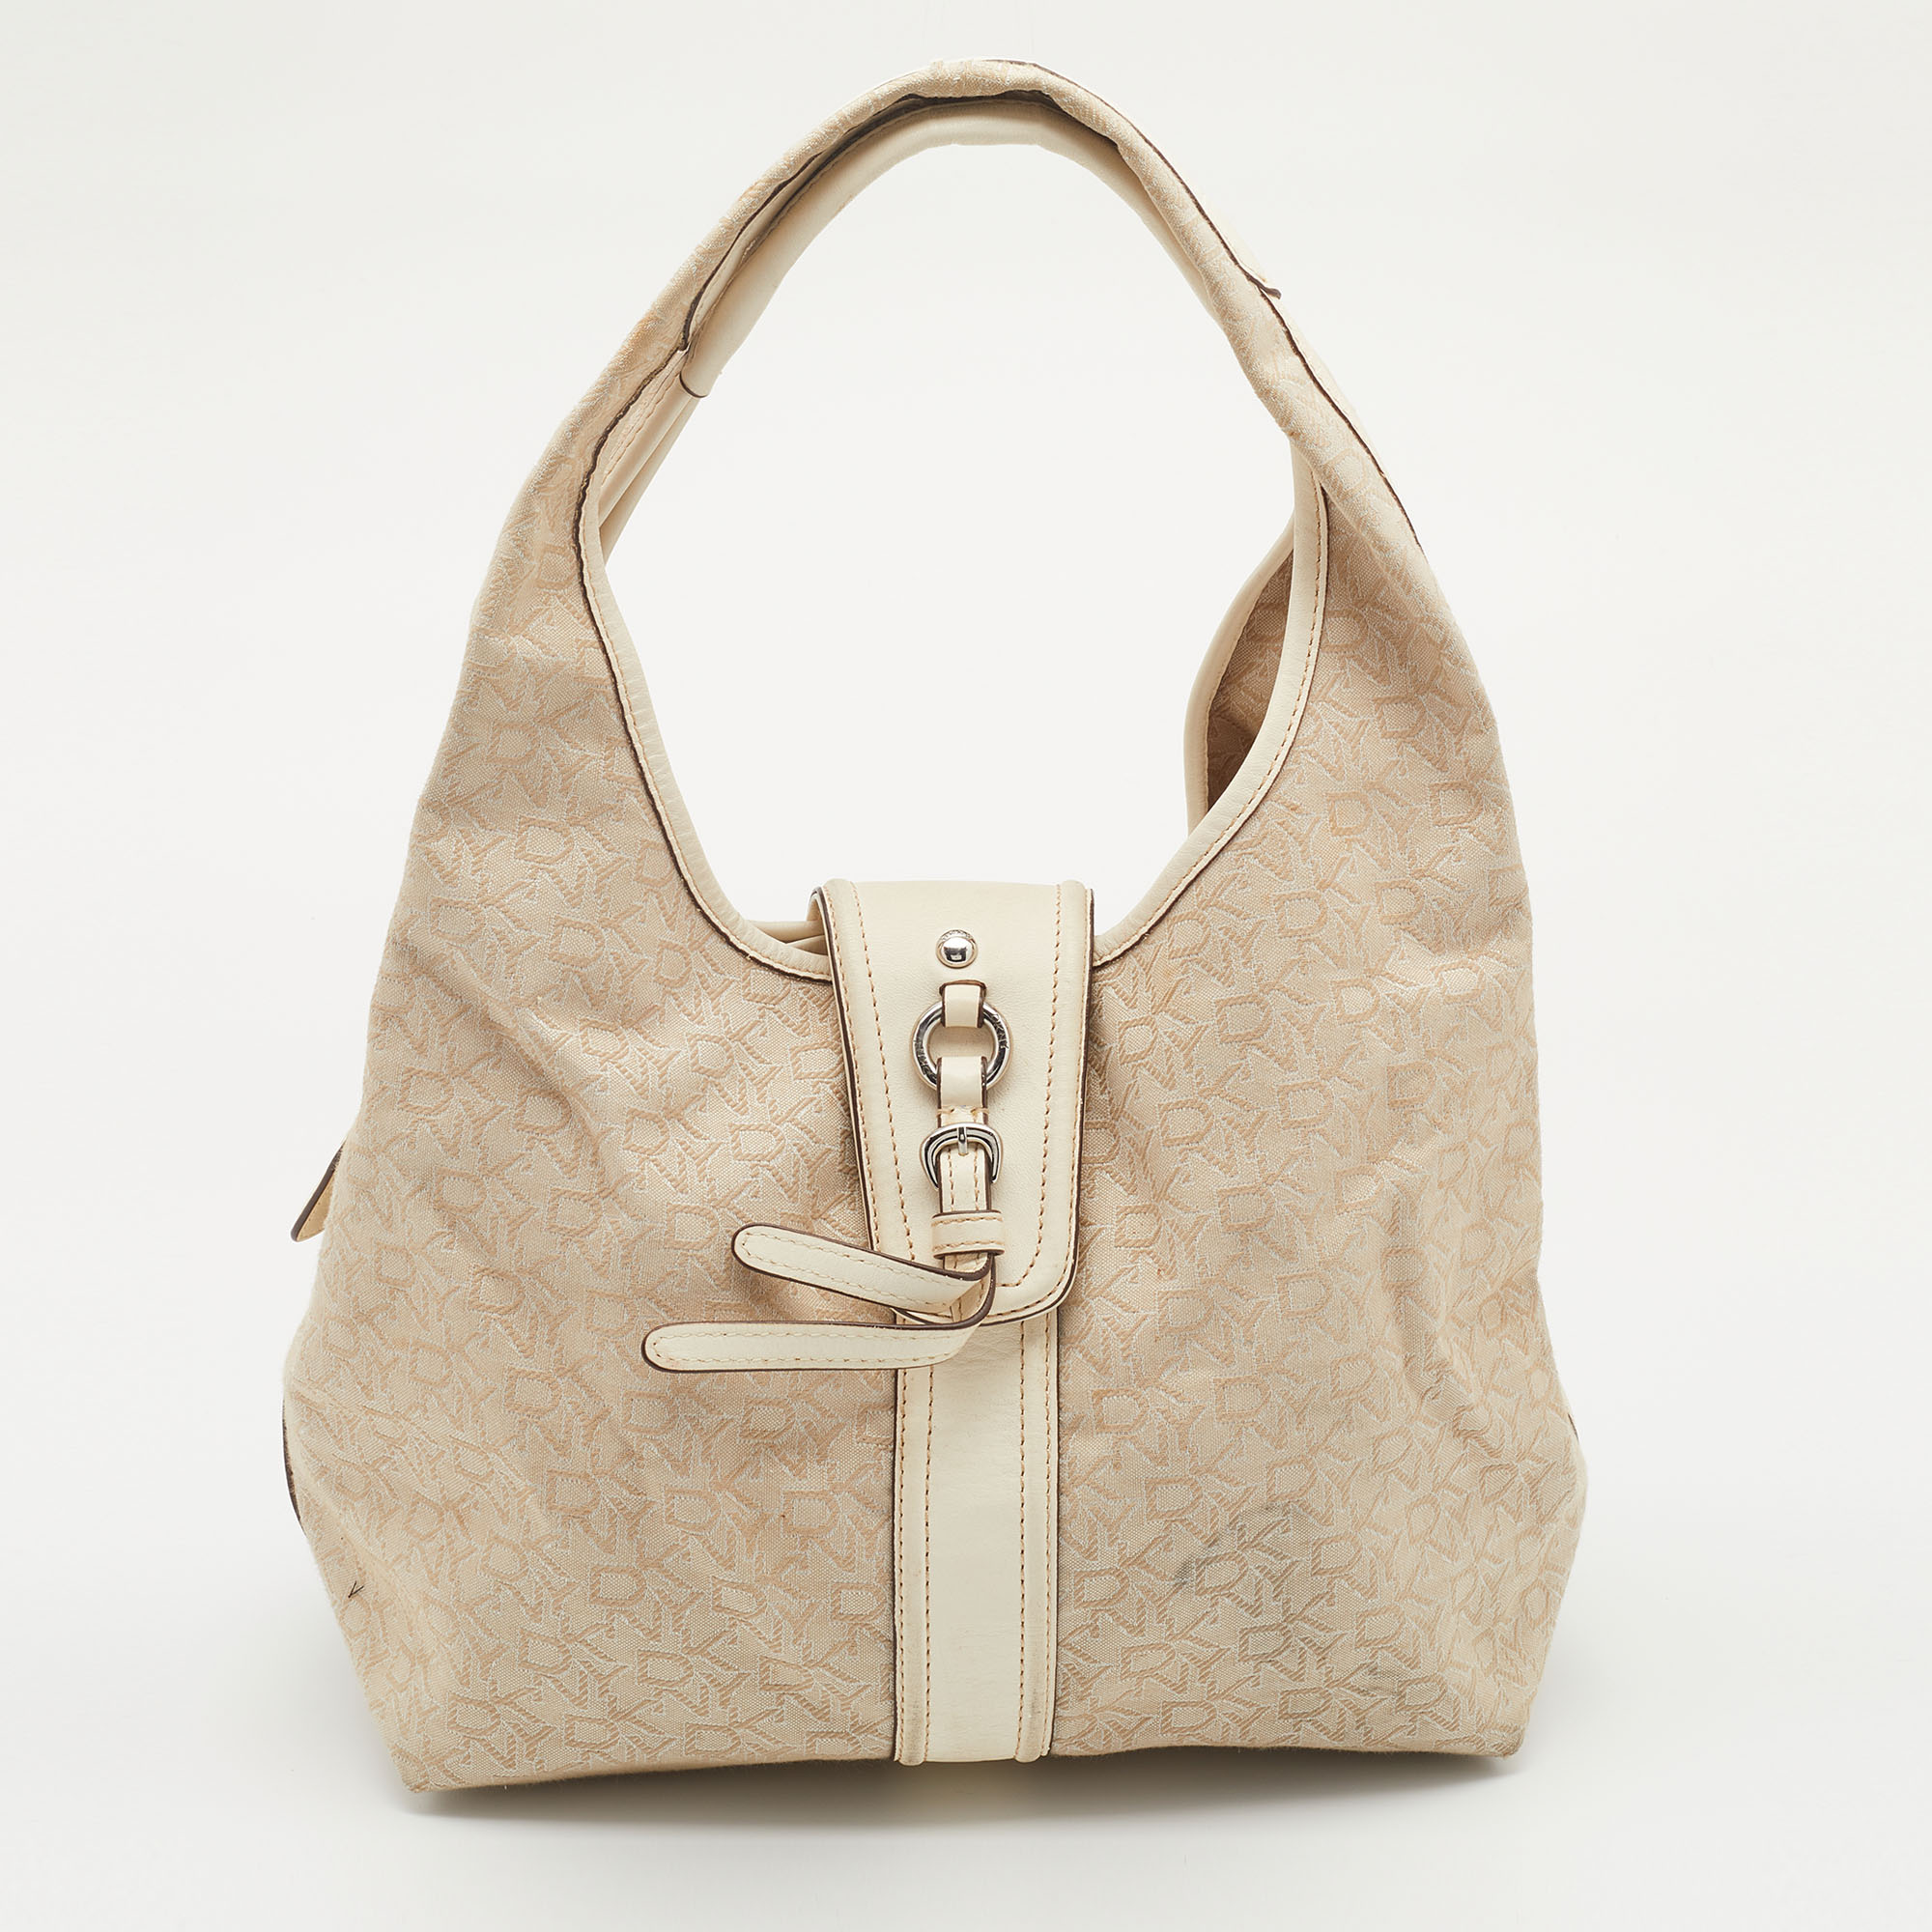 DKNY Light Beige/Cream Canvas And Leather Hobo